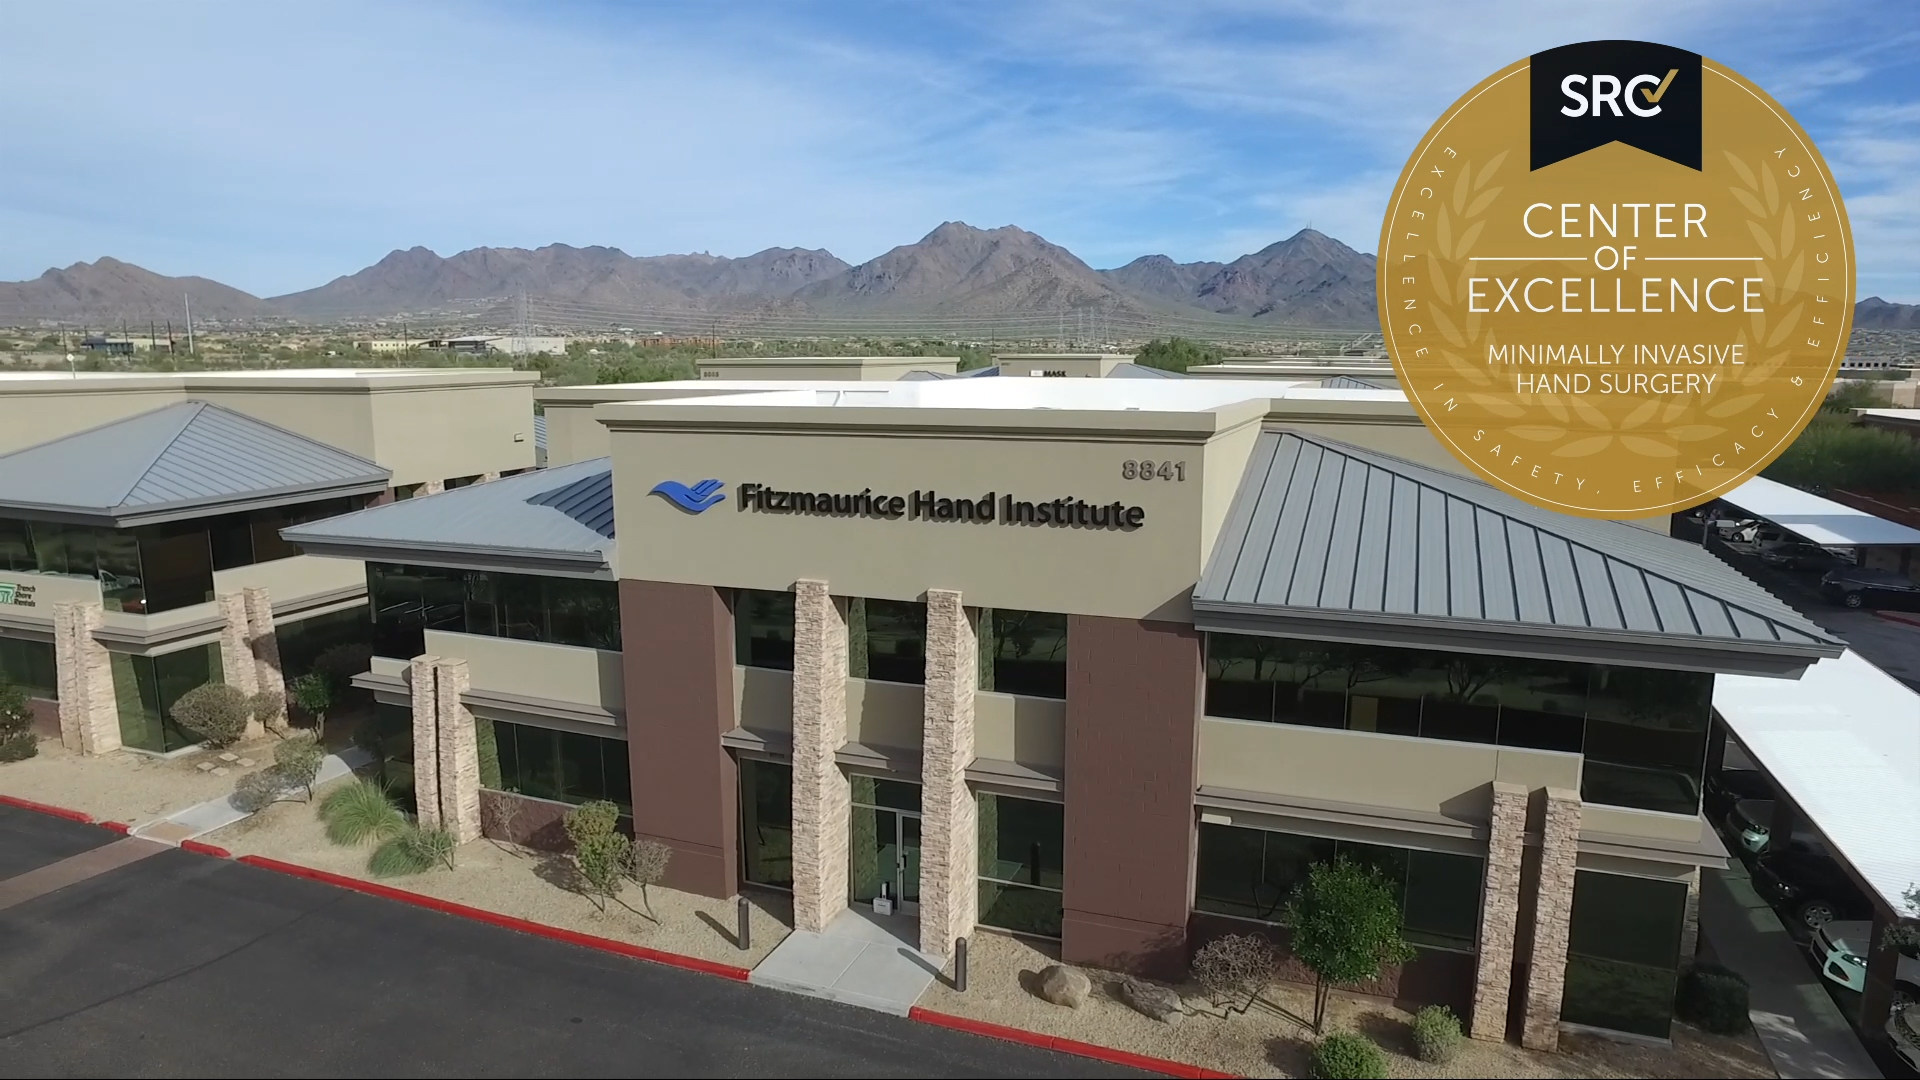 Fitzmaurice Hand Institute Becomes the First Surgical Facility Worldwide to Achieve Accreditation as a Center of Excellence in Minimally Invasive Hand Surgery